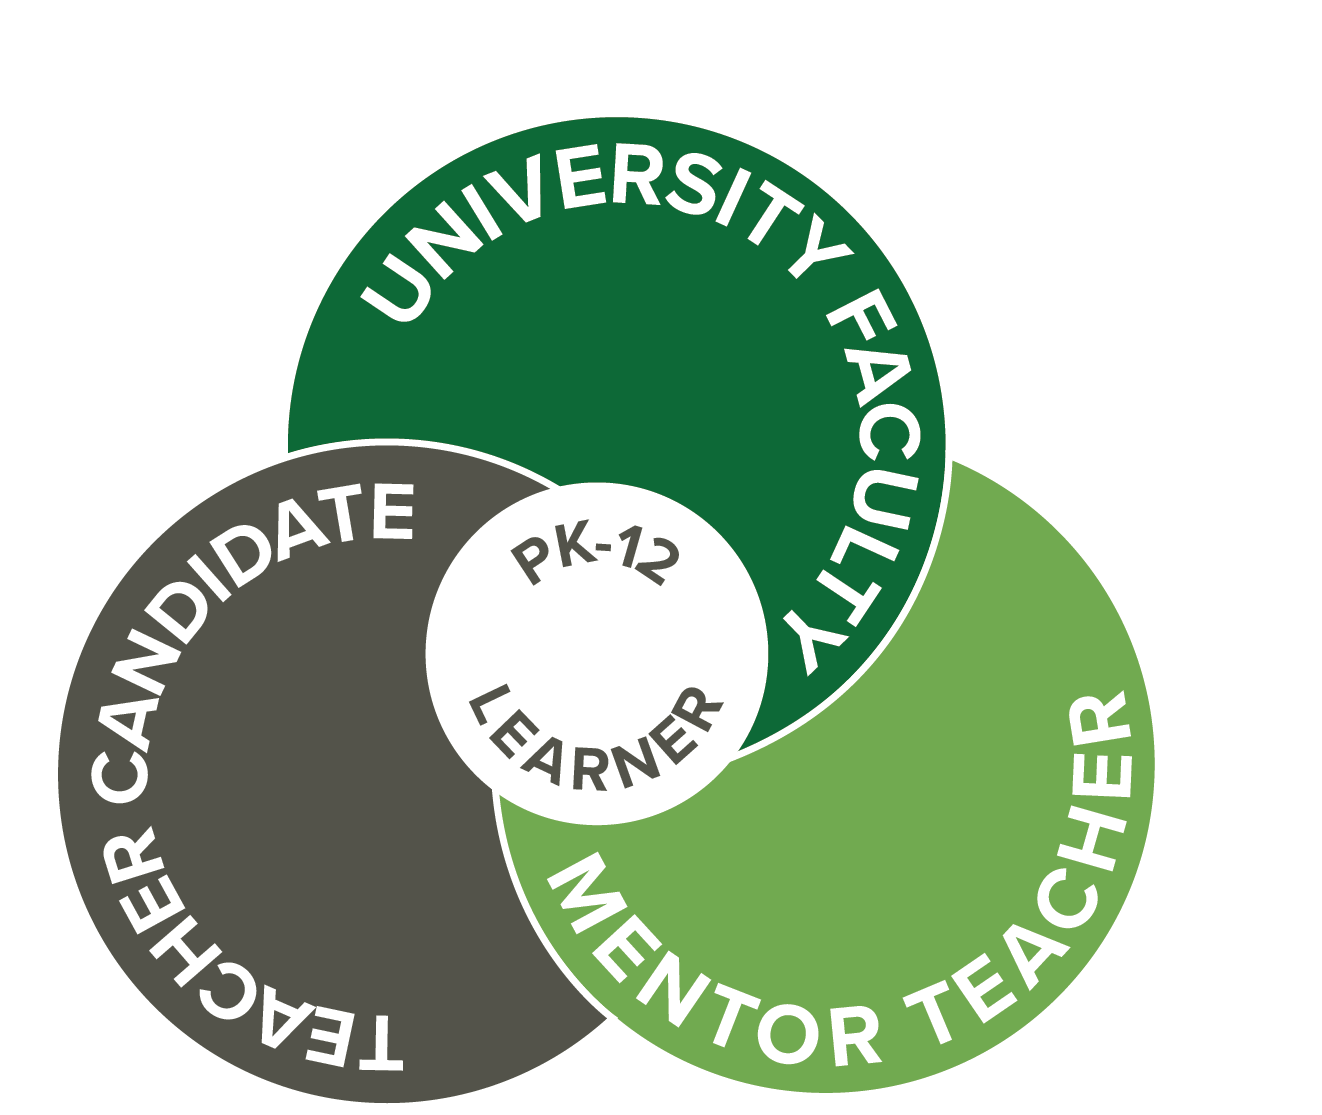 Three circles overlapping referencing the teacher candidate, faculty and mentor teacher, Co-teaching model